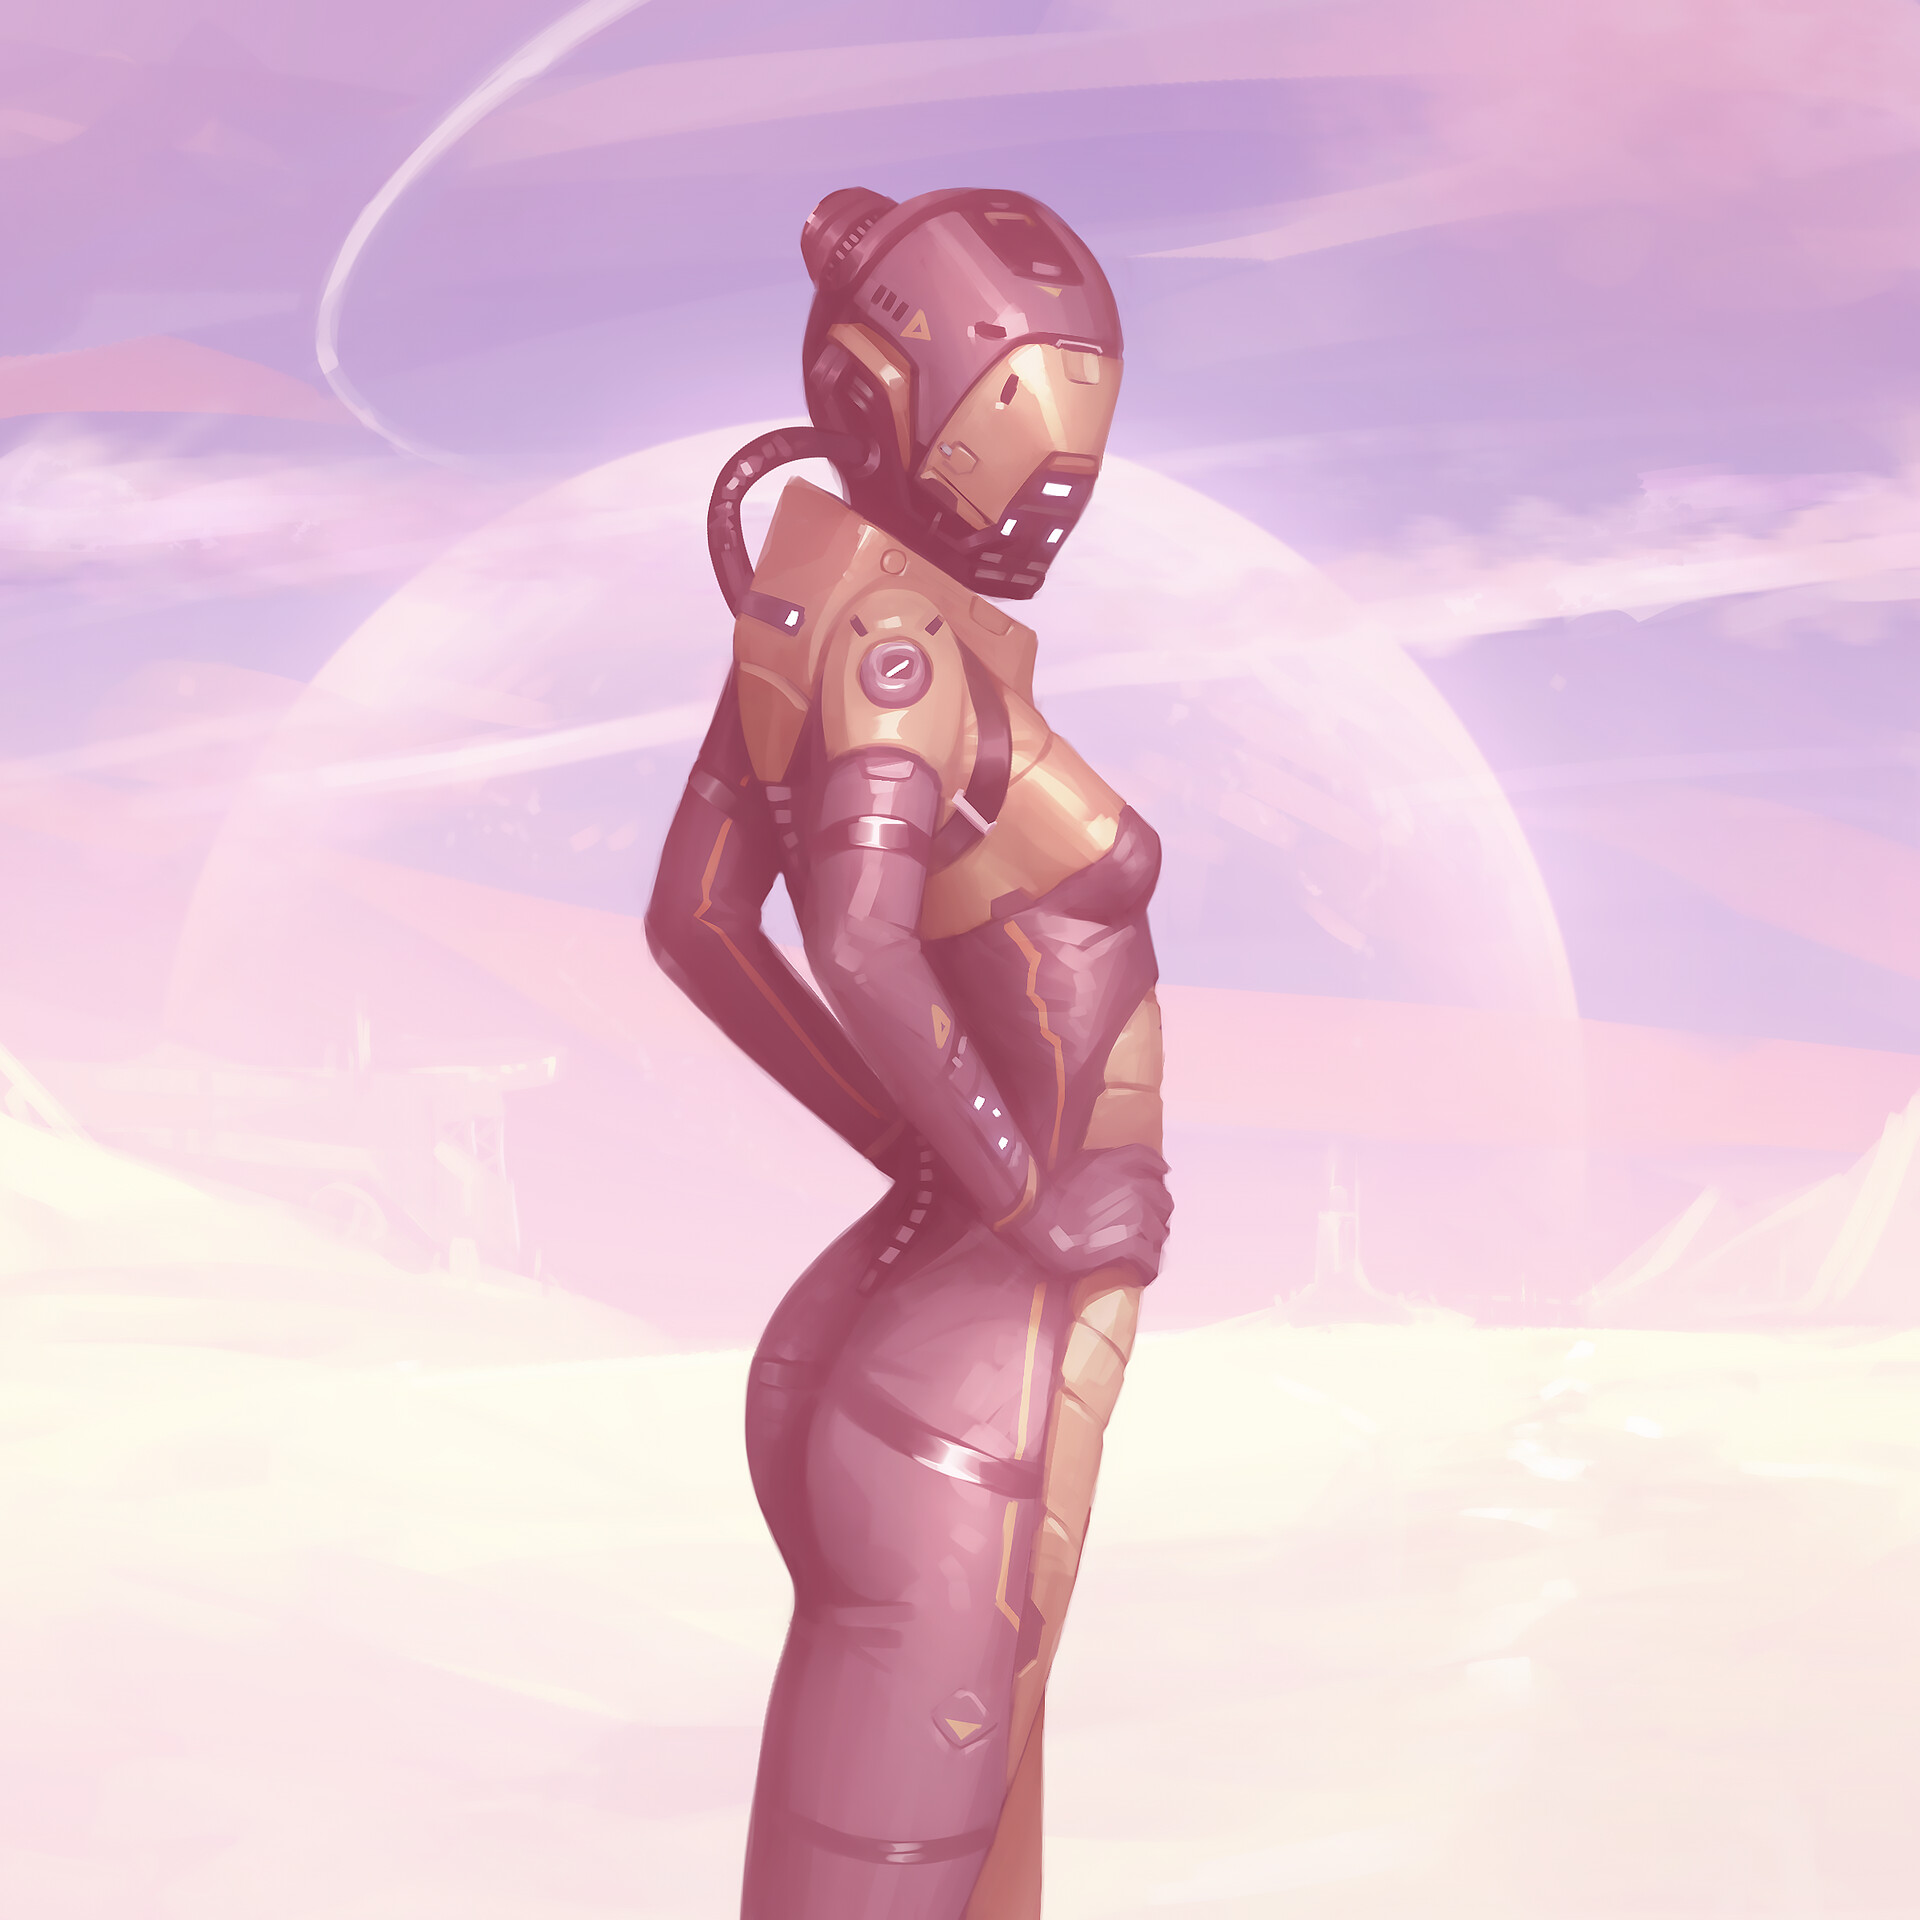 Astronaut character by Twinji Adult Pics Hq